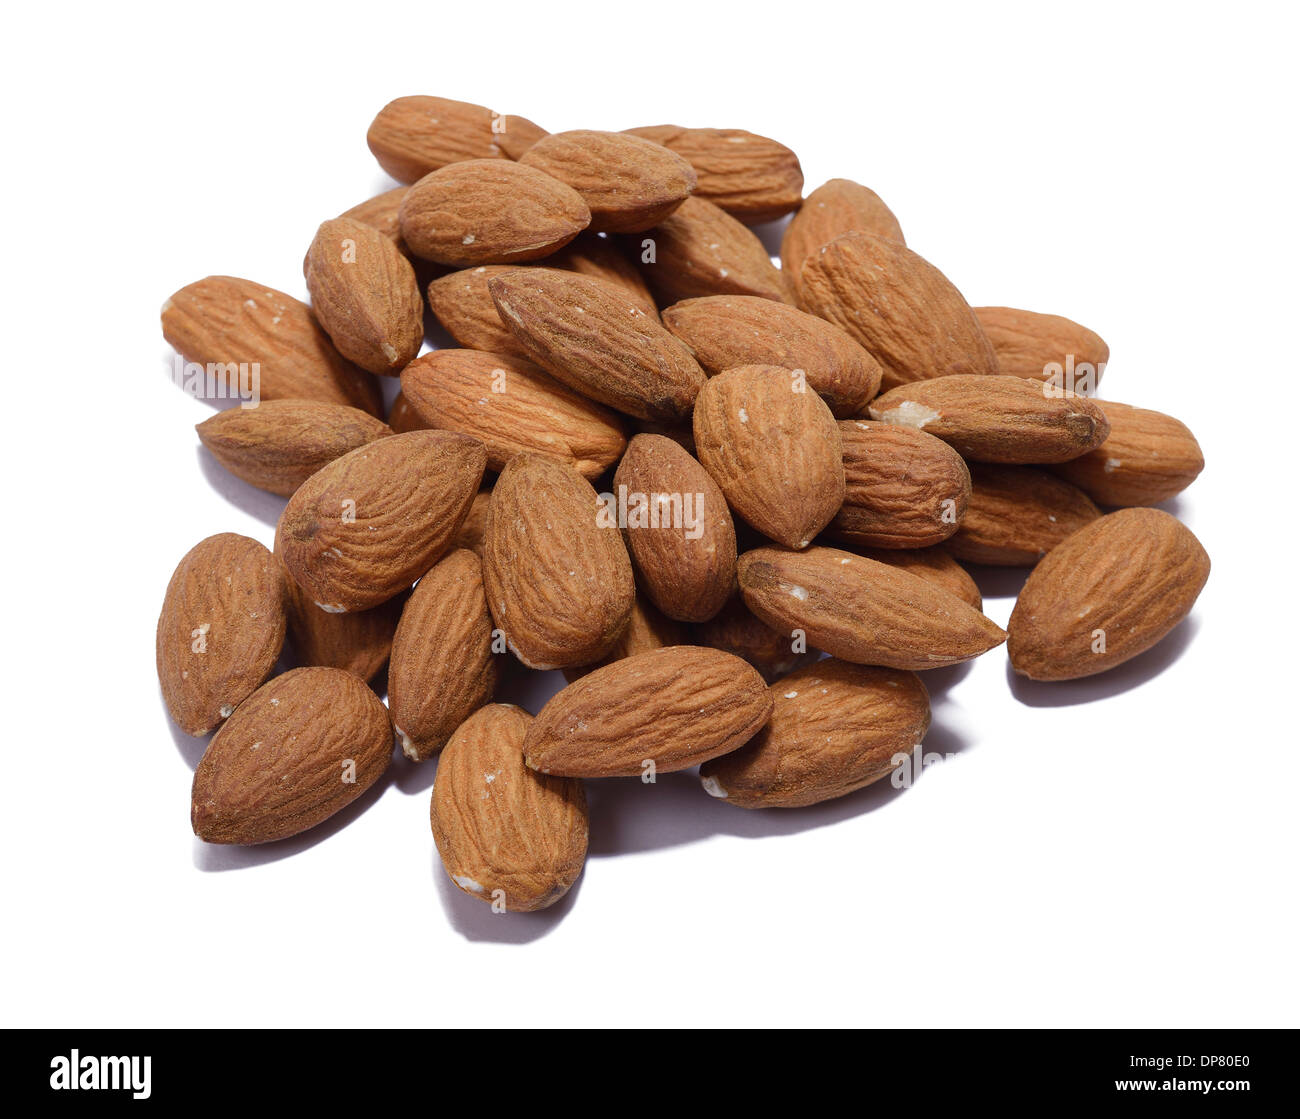 A small pile of almonds Stock Photo